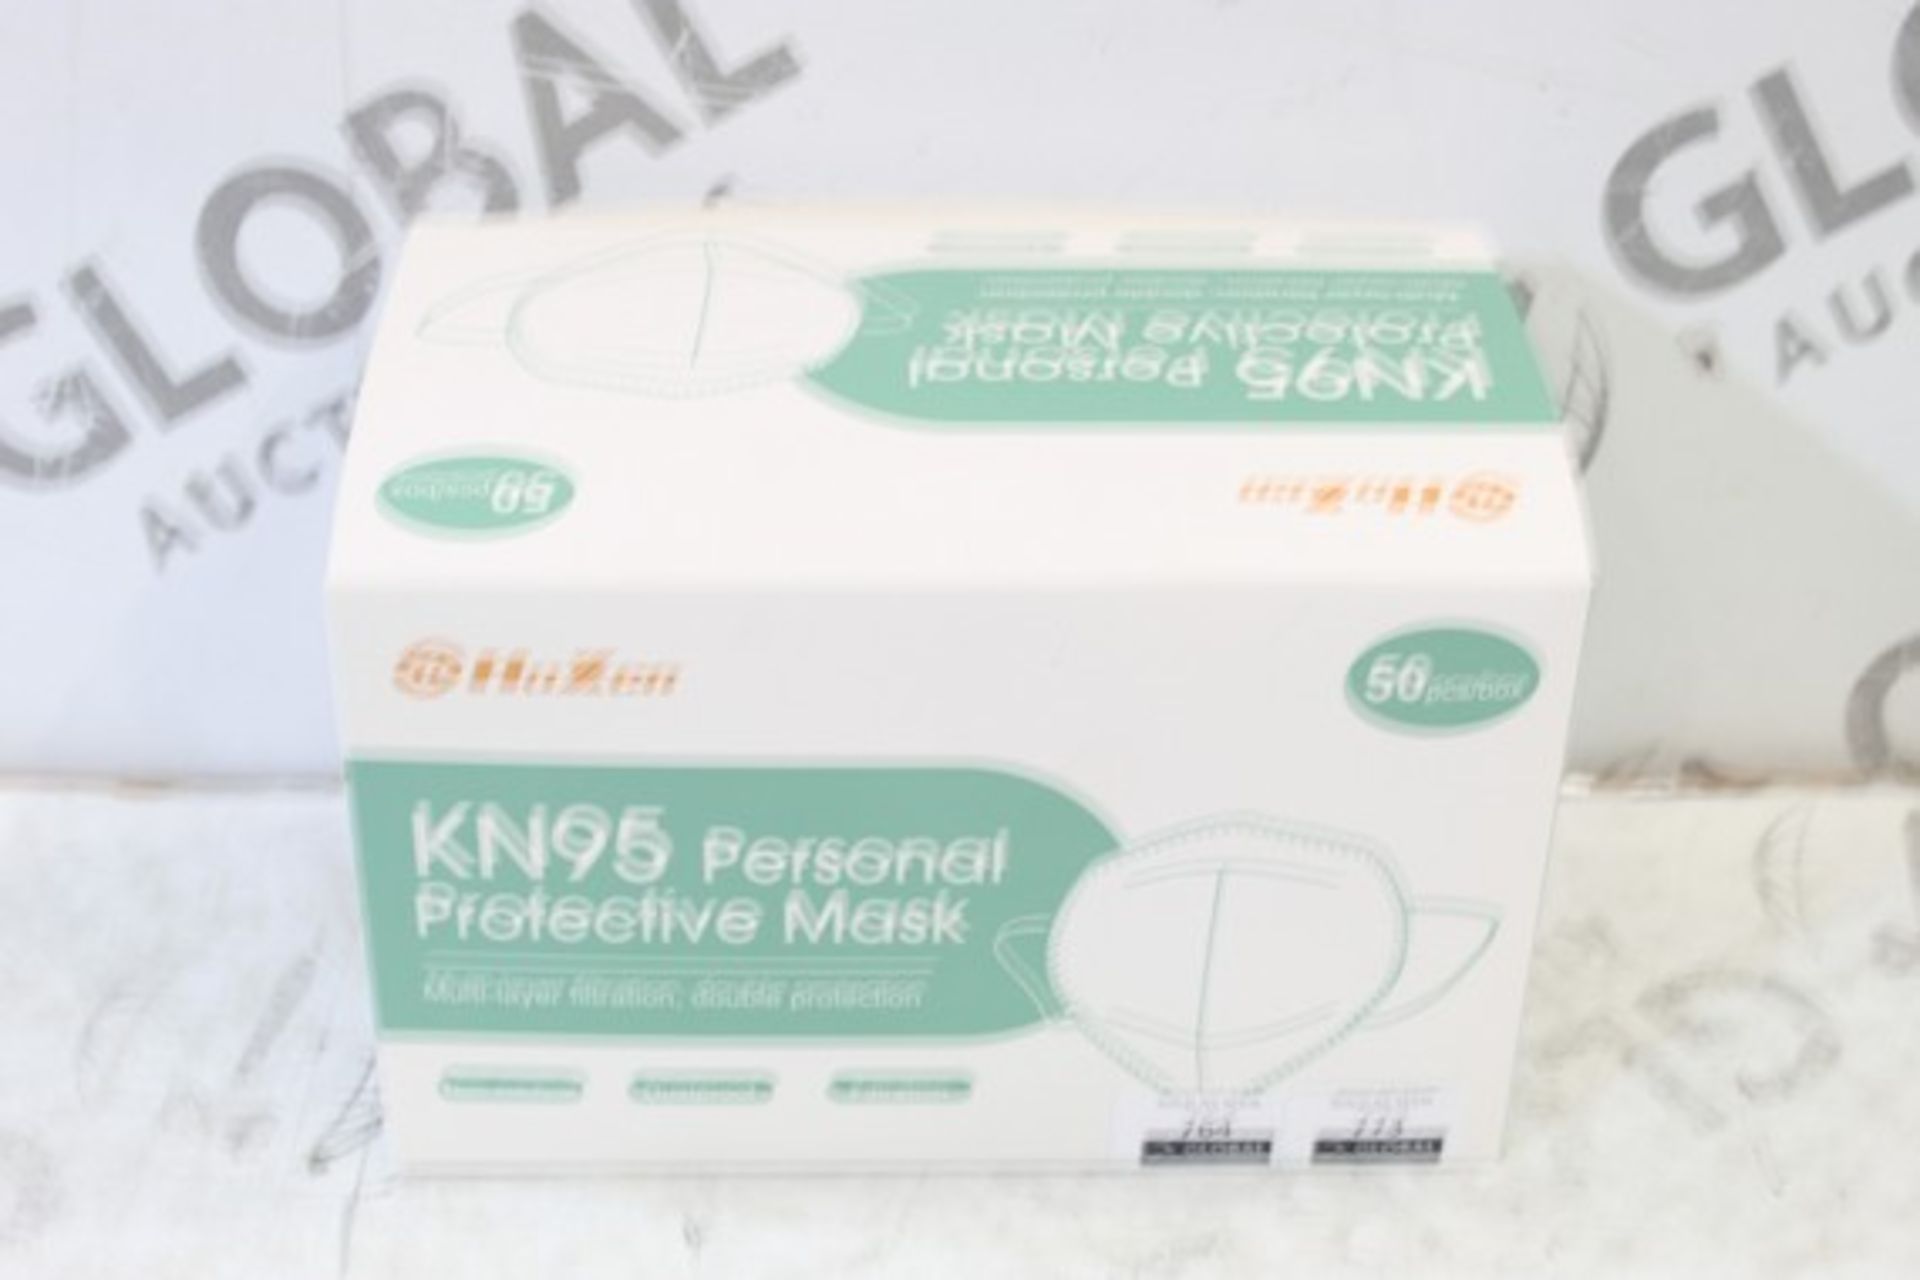 Box To Contain 50 Brand New Hoxen KN95 Personal Ce